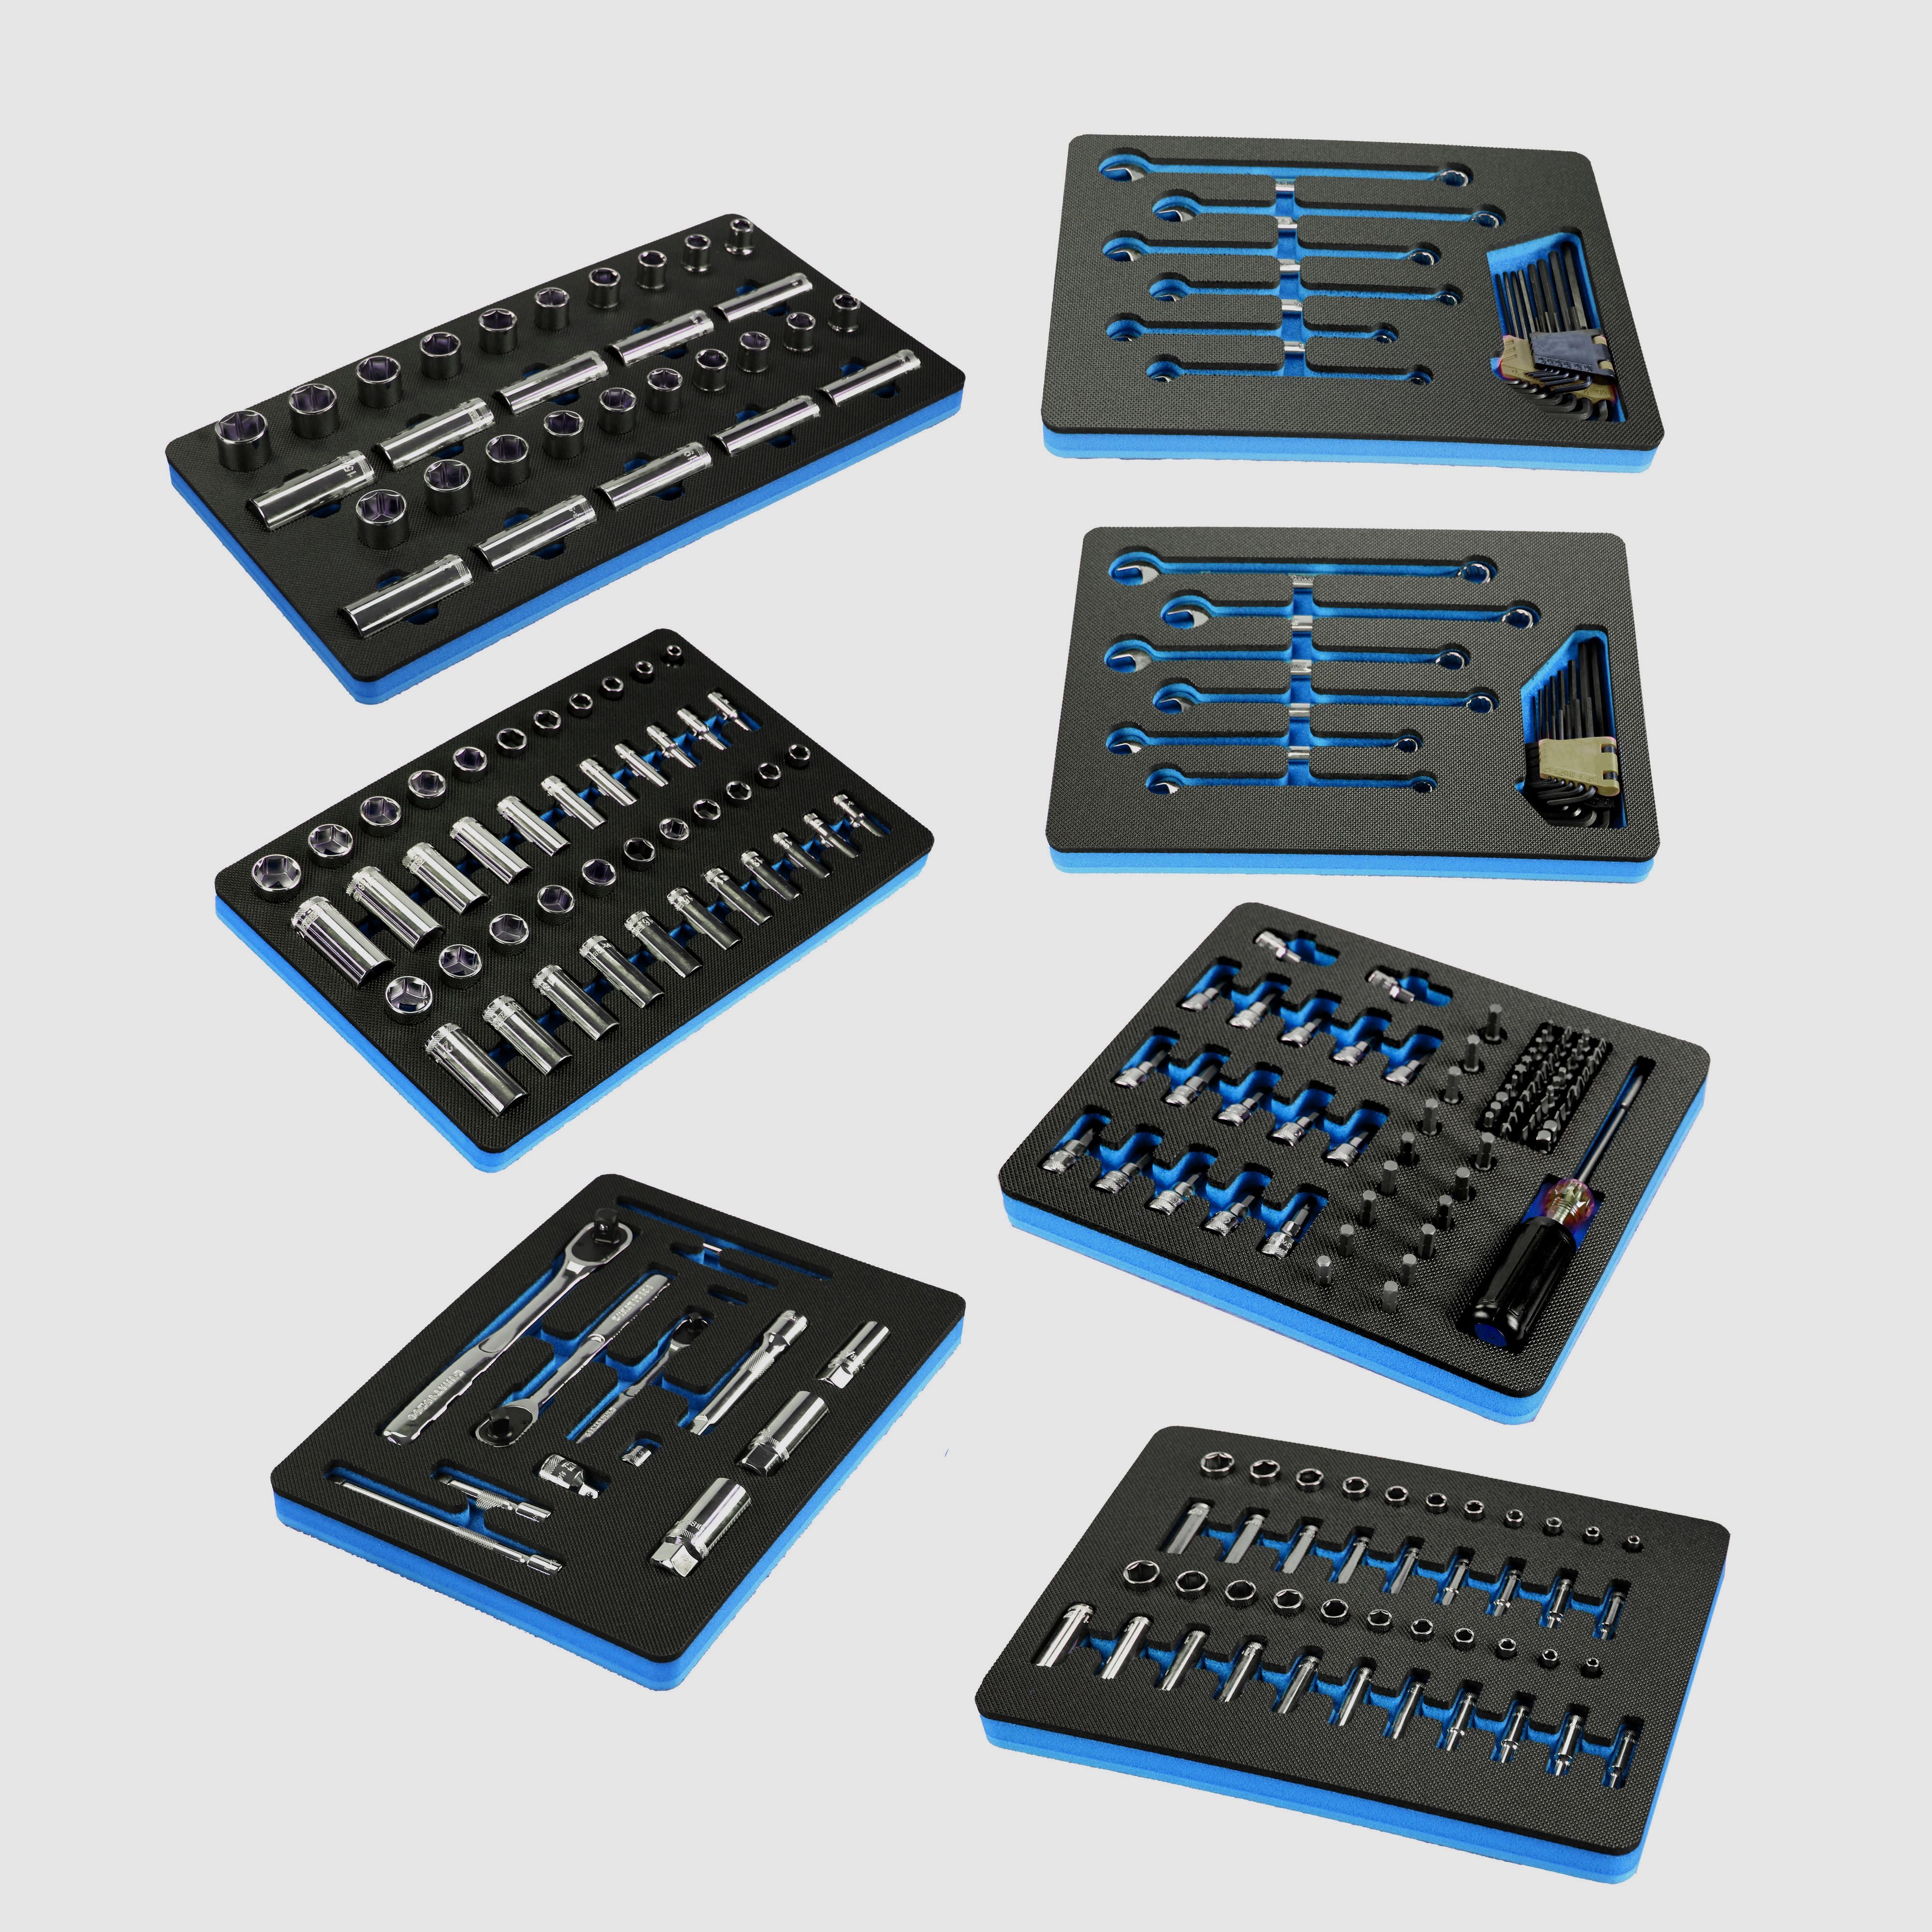 Tool Drawer Organizer 247 Piece Insert Set Blue and Black Durable Foam Holds Many Tools and Accessories Trays Fits DEWALT Mechanics Set DWMT81535 Fits Most Cabinet and Chest Drawers